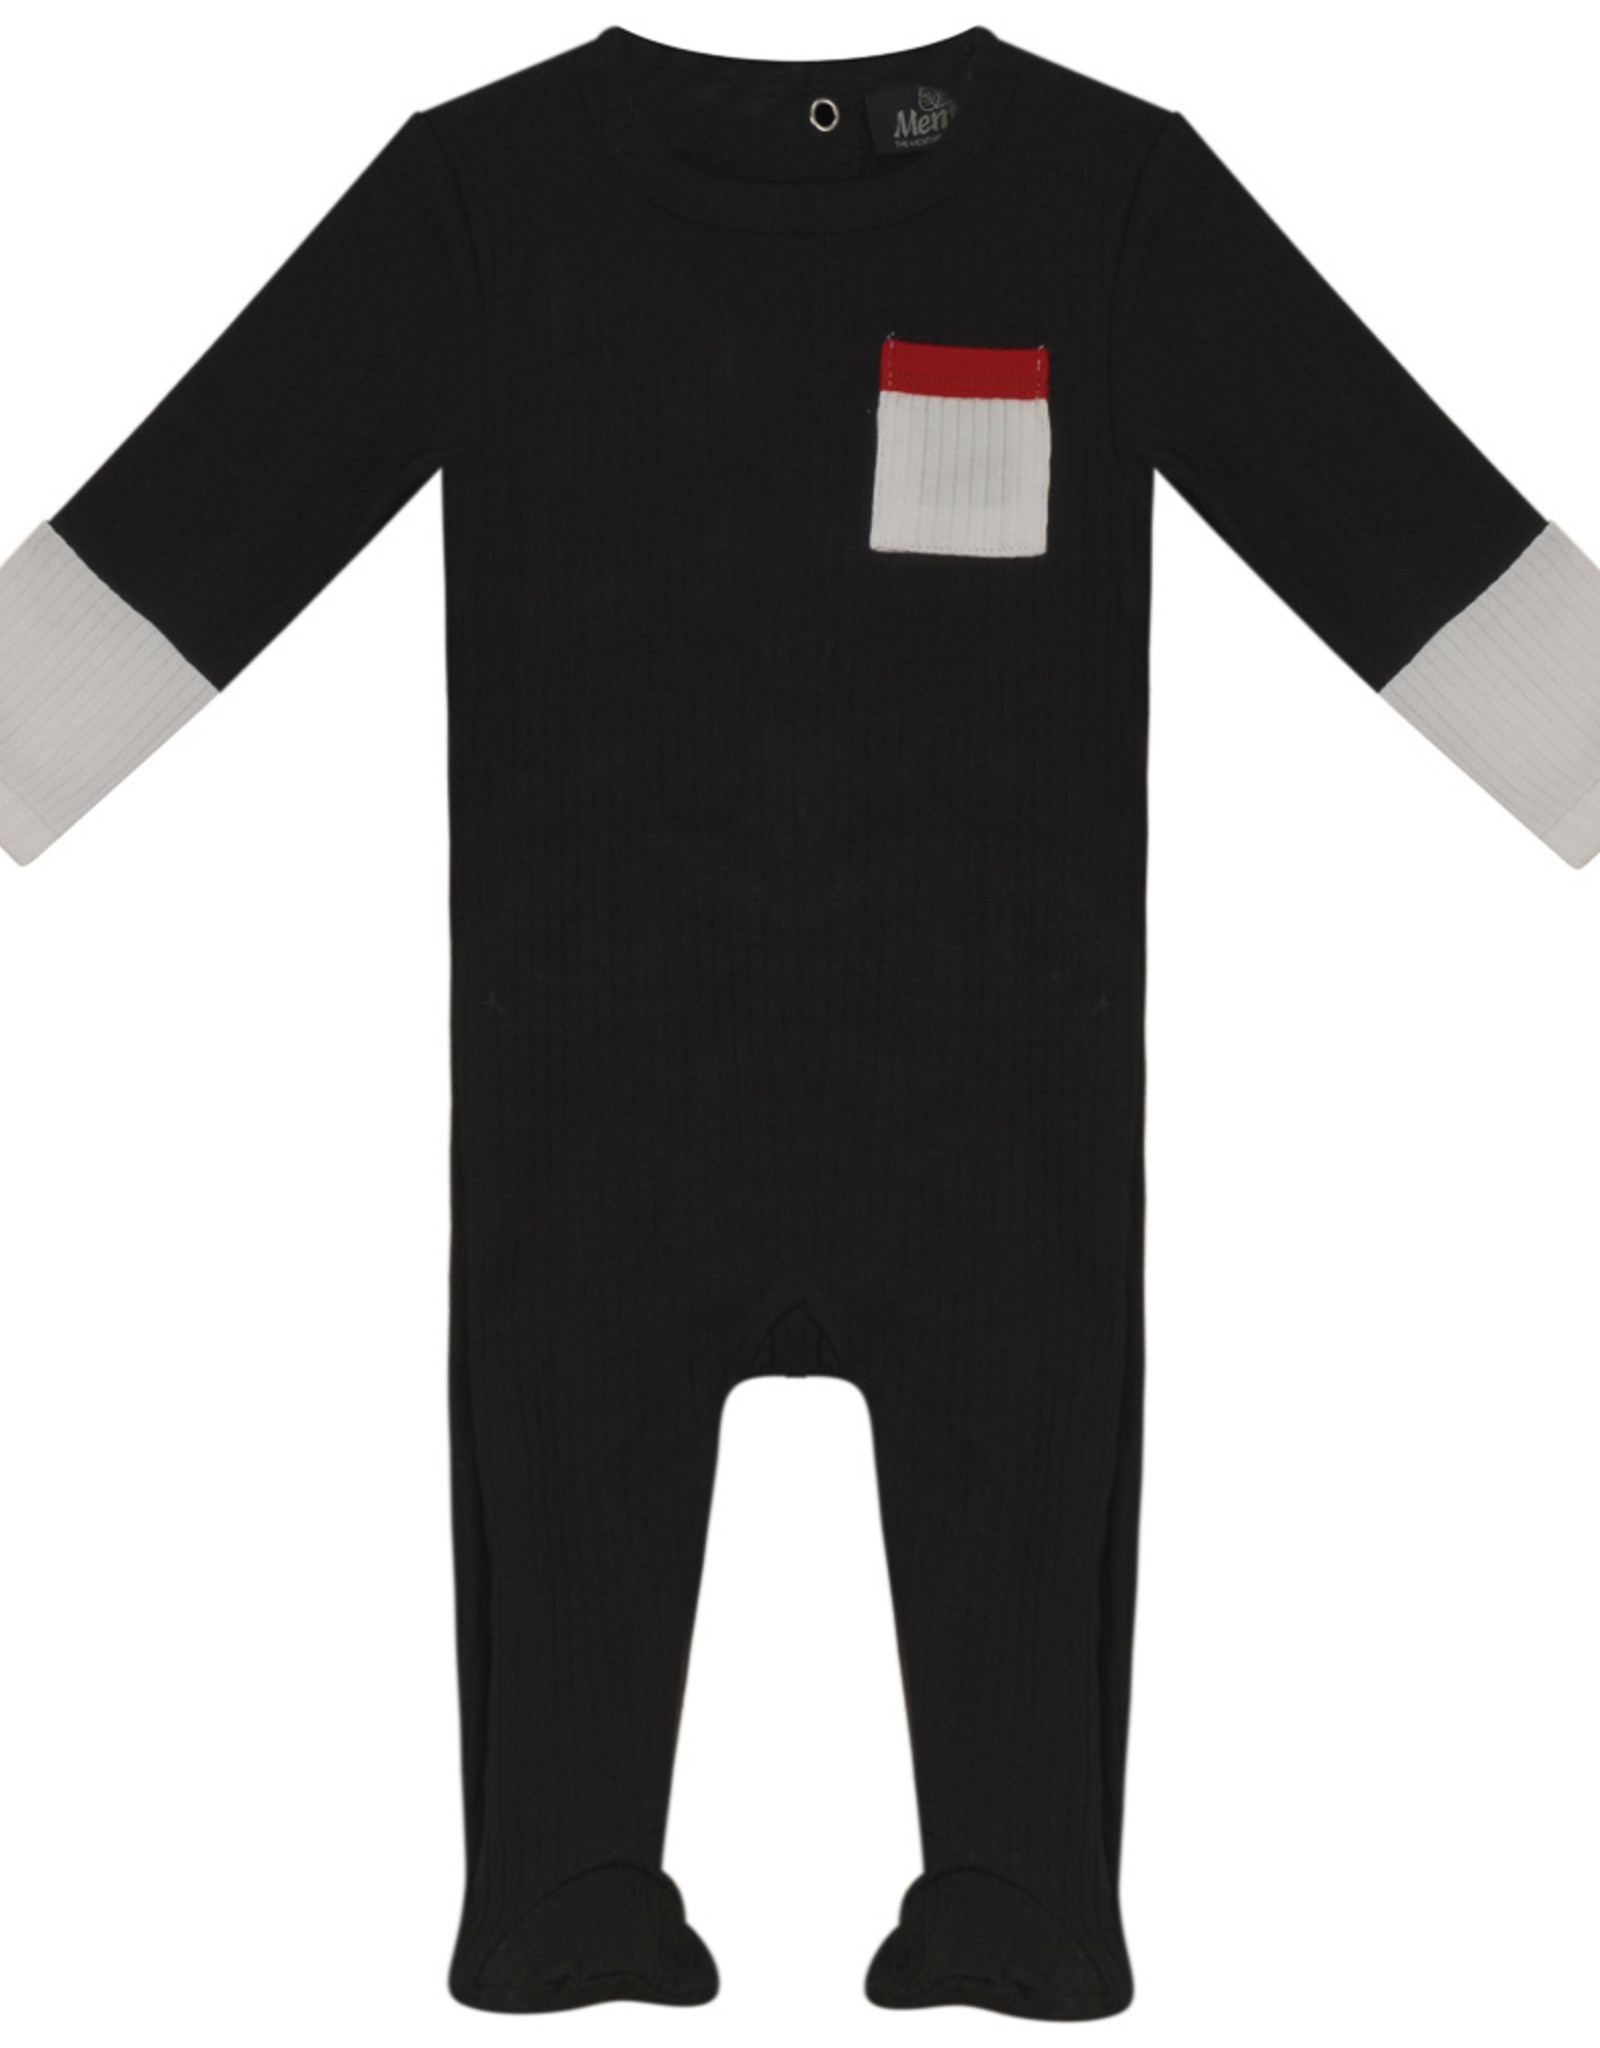 Menthe Menthe Ribbed Footie Pajama with Pocket and Colorblock Sleeves